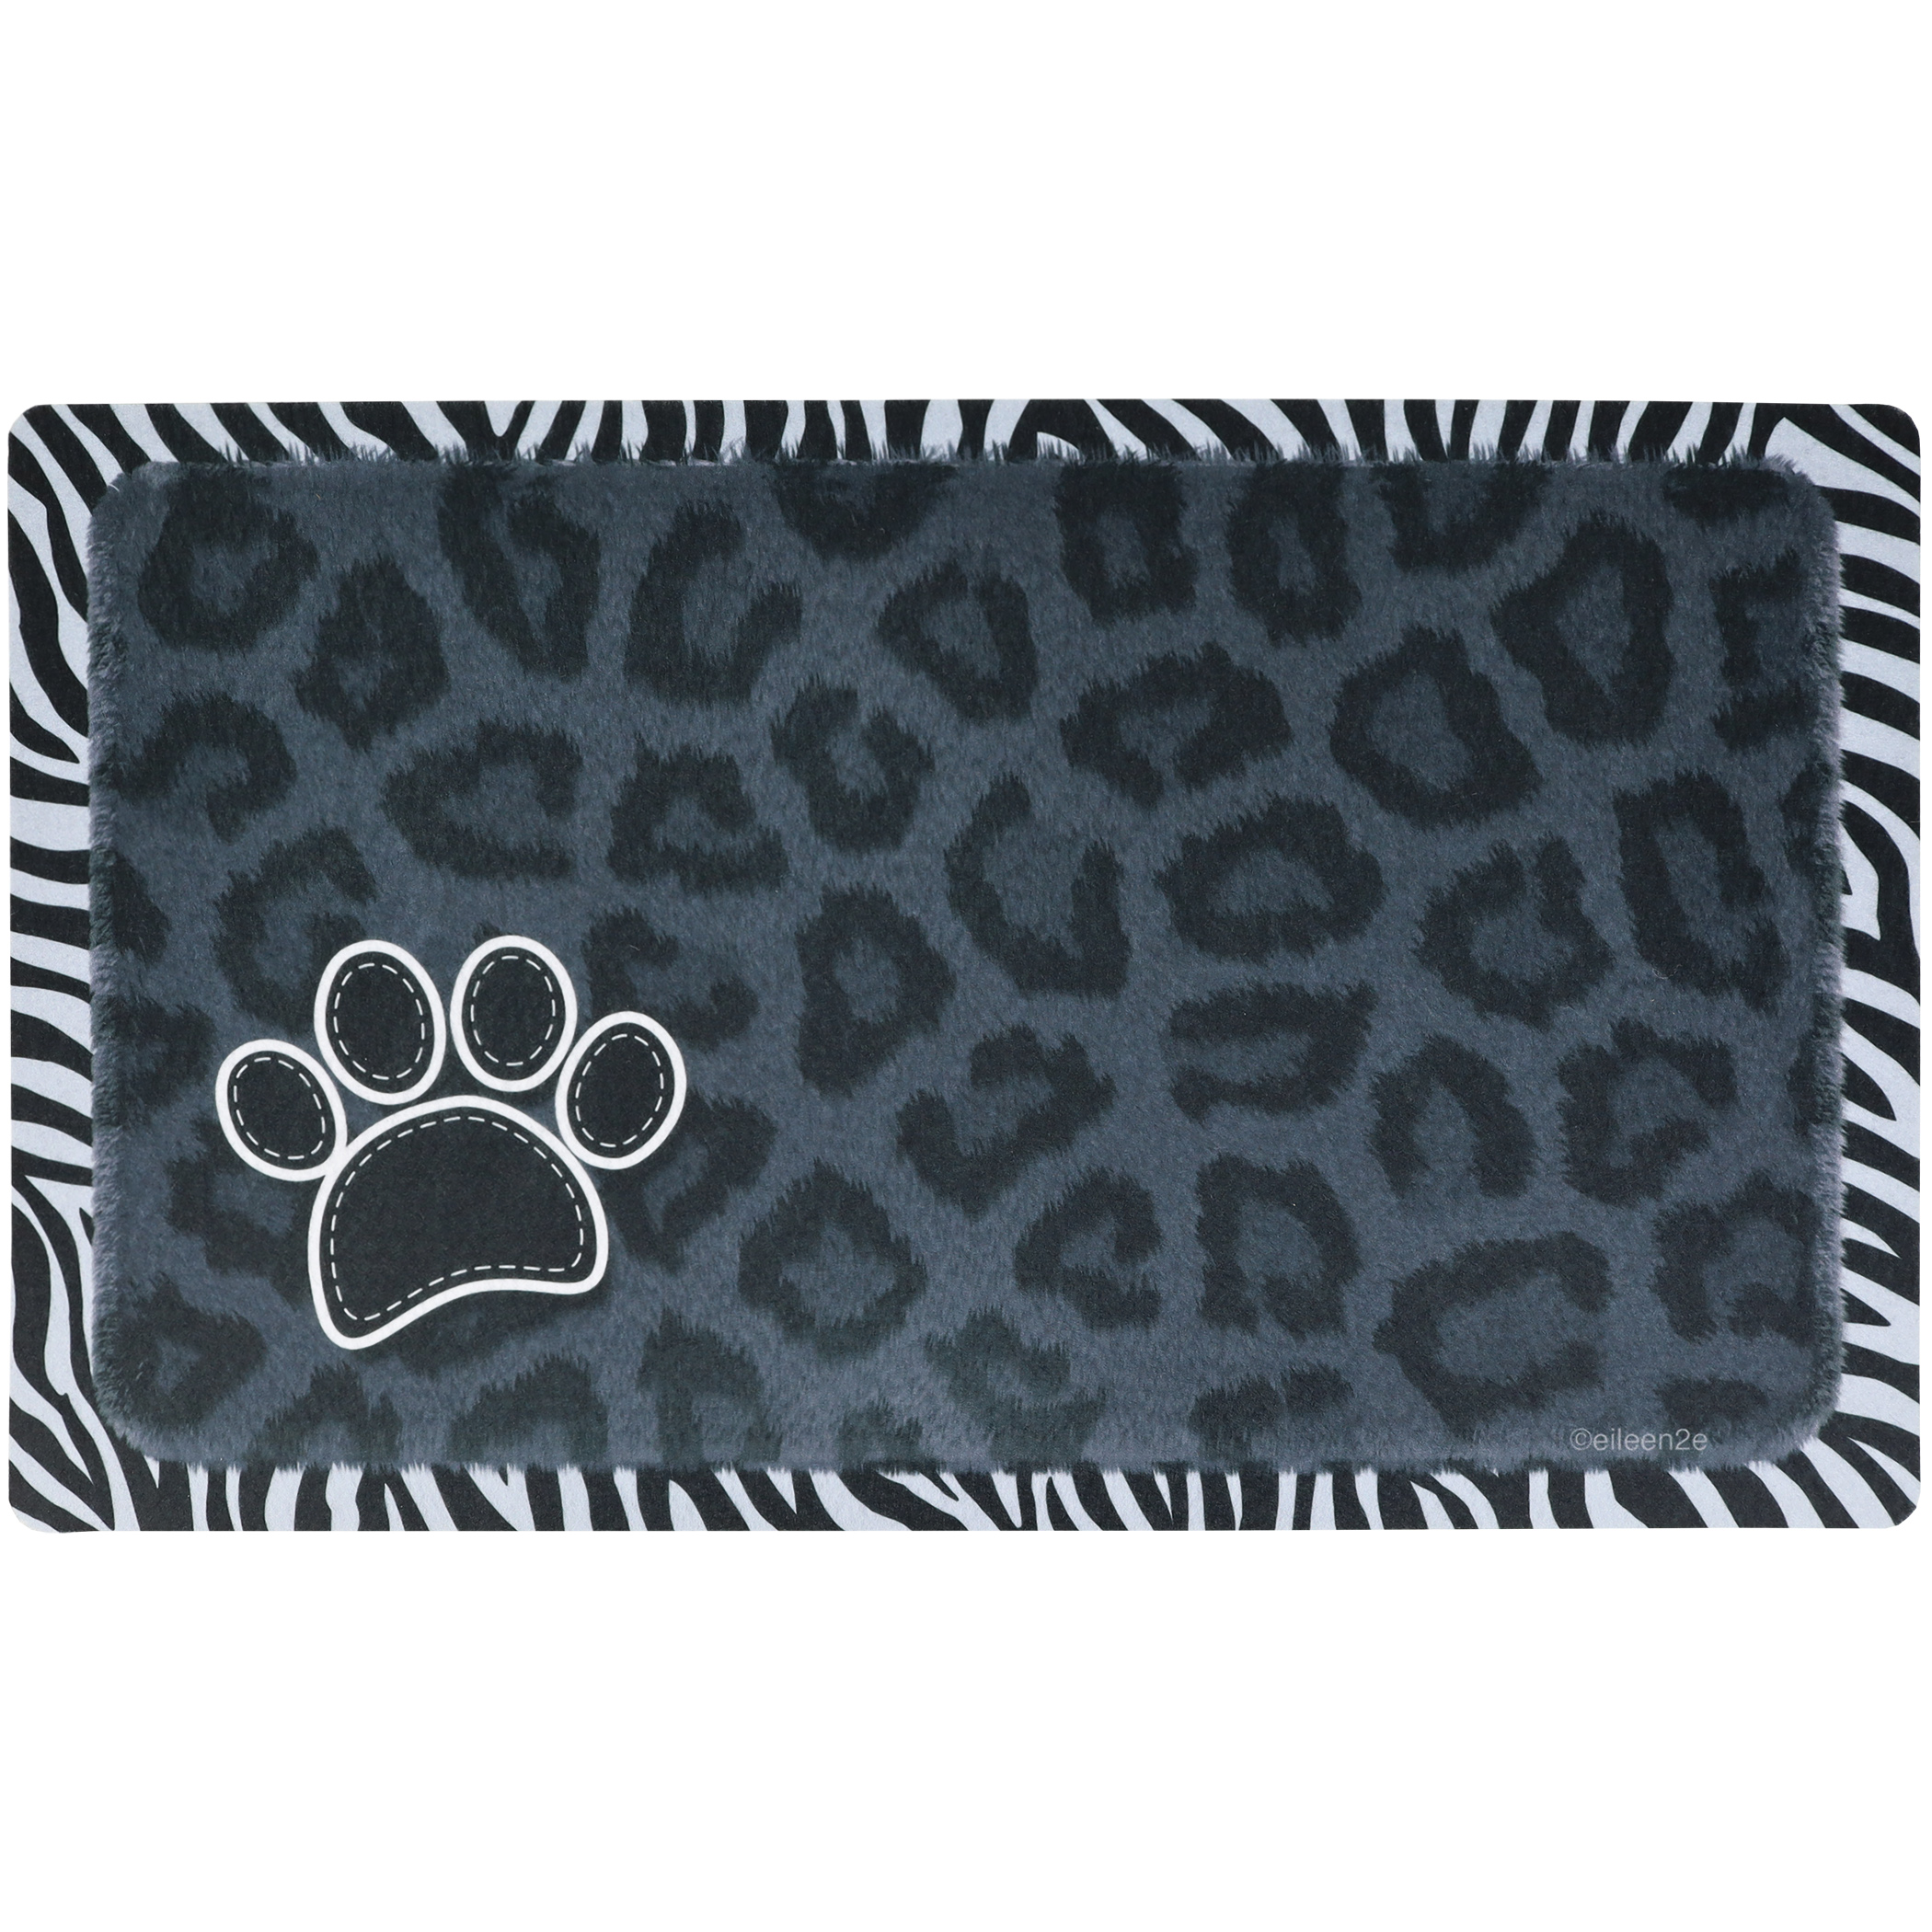 Drymate PREMIUM Litter Trapping Mat - Eco Dogs And Cats – Vegan and Eco  Friendly Pet Food, pet products, pet toys